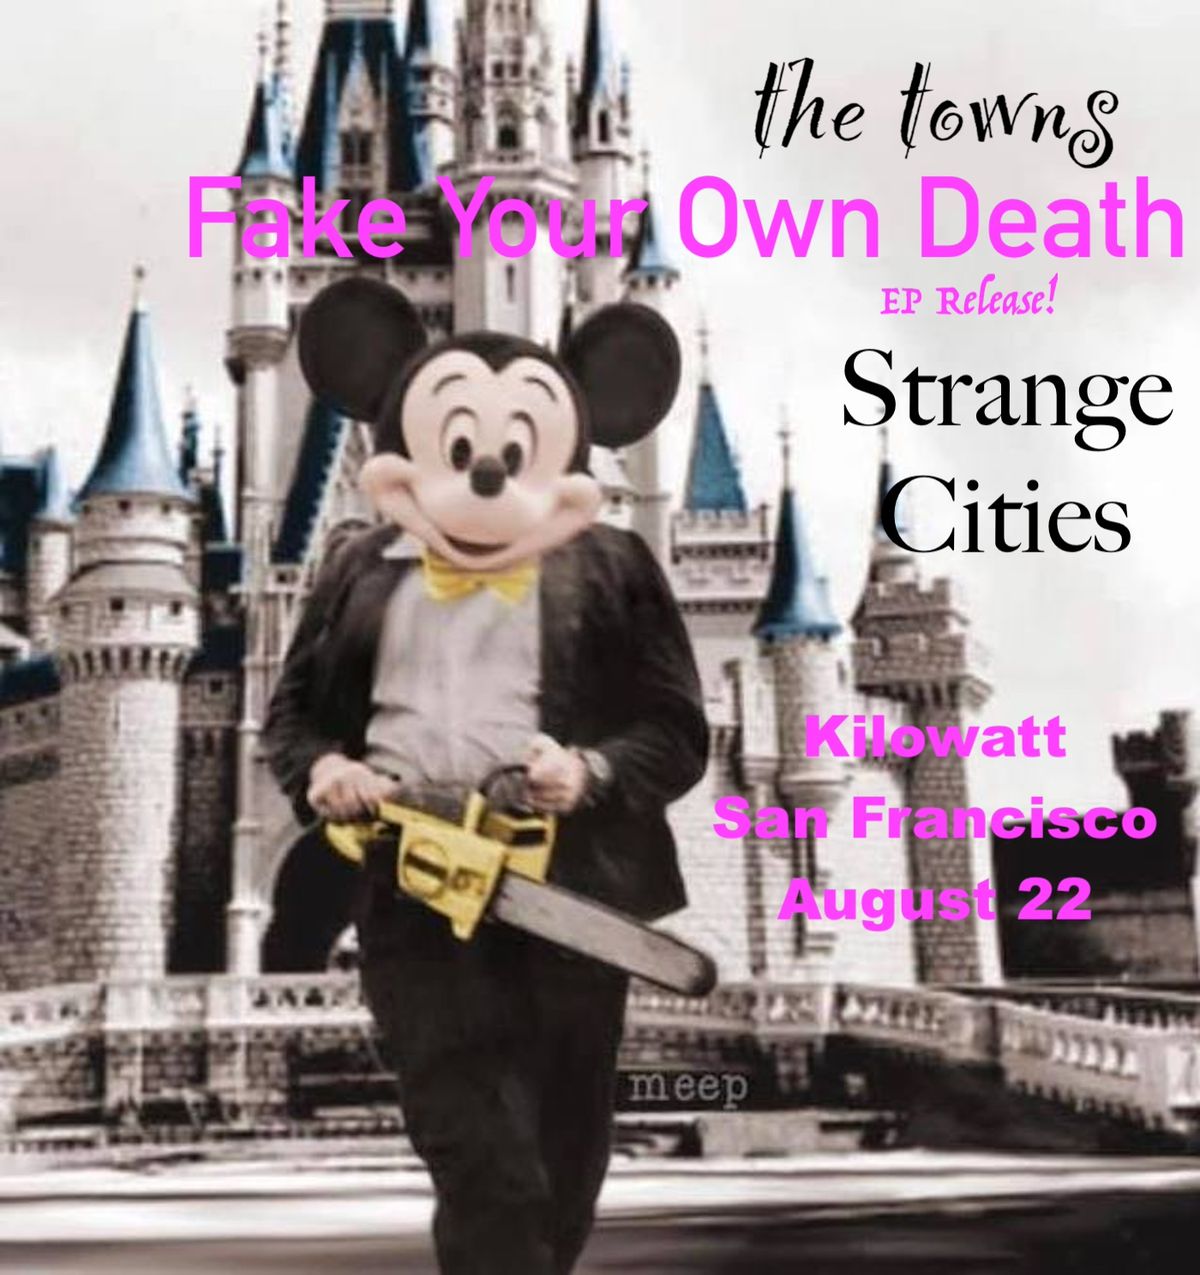 The Towns, Fake Your Own Death (EP Release) and Strange Cities